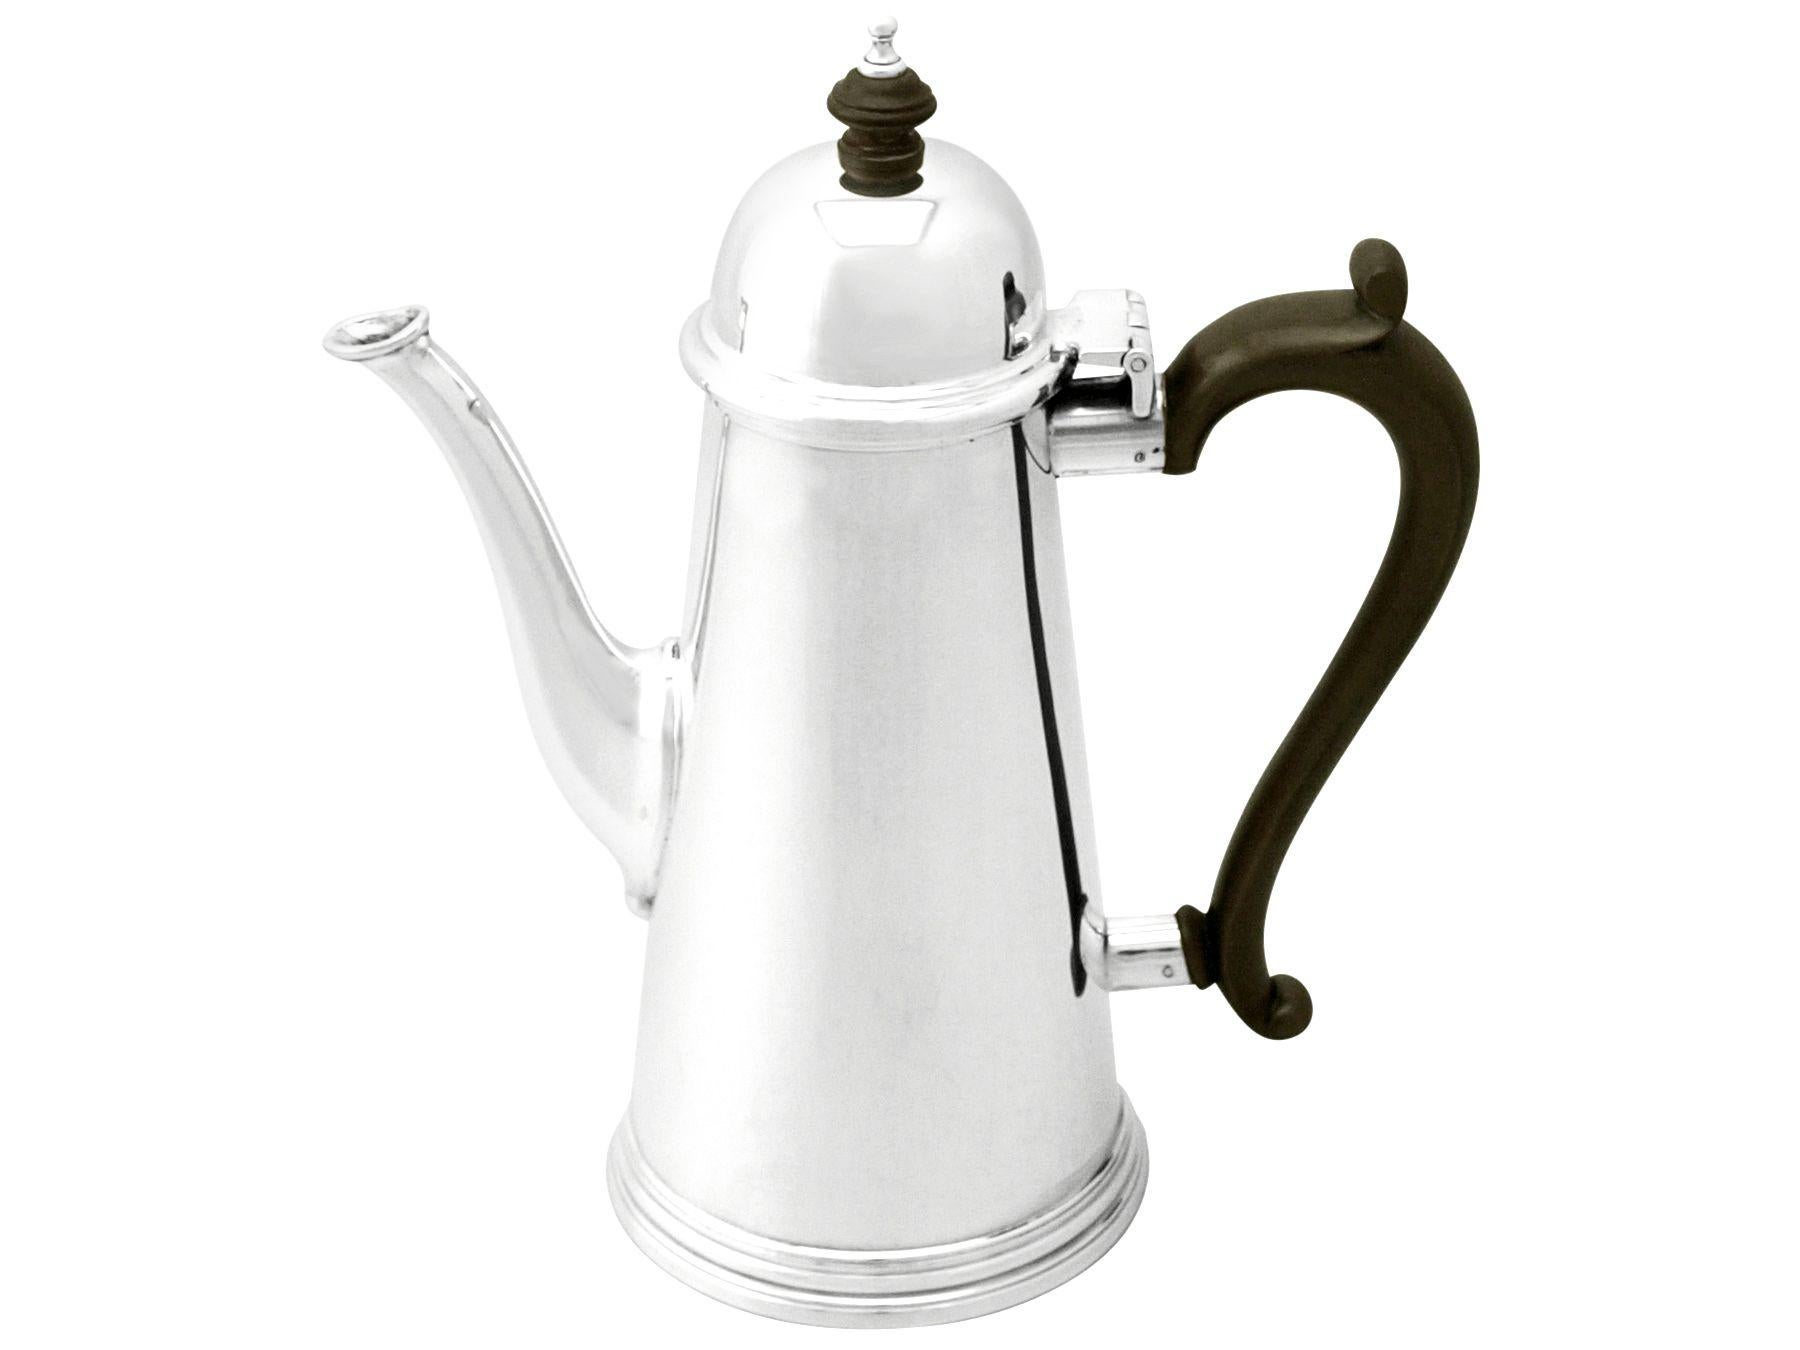 William Comyns & Sons Ltd Vintage George I Style 1961 Sterling Silver Coffee Pot In Excellent Condition For Sale In Jesmond, Newcastle Upon Tyne